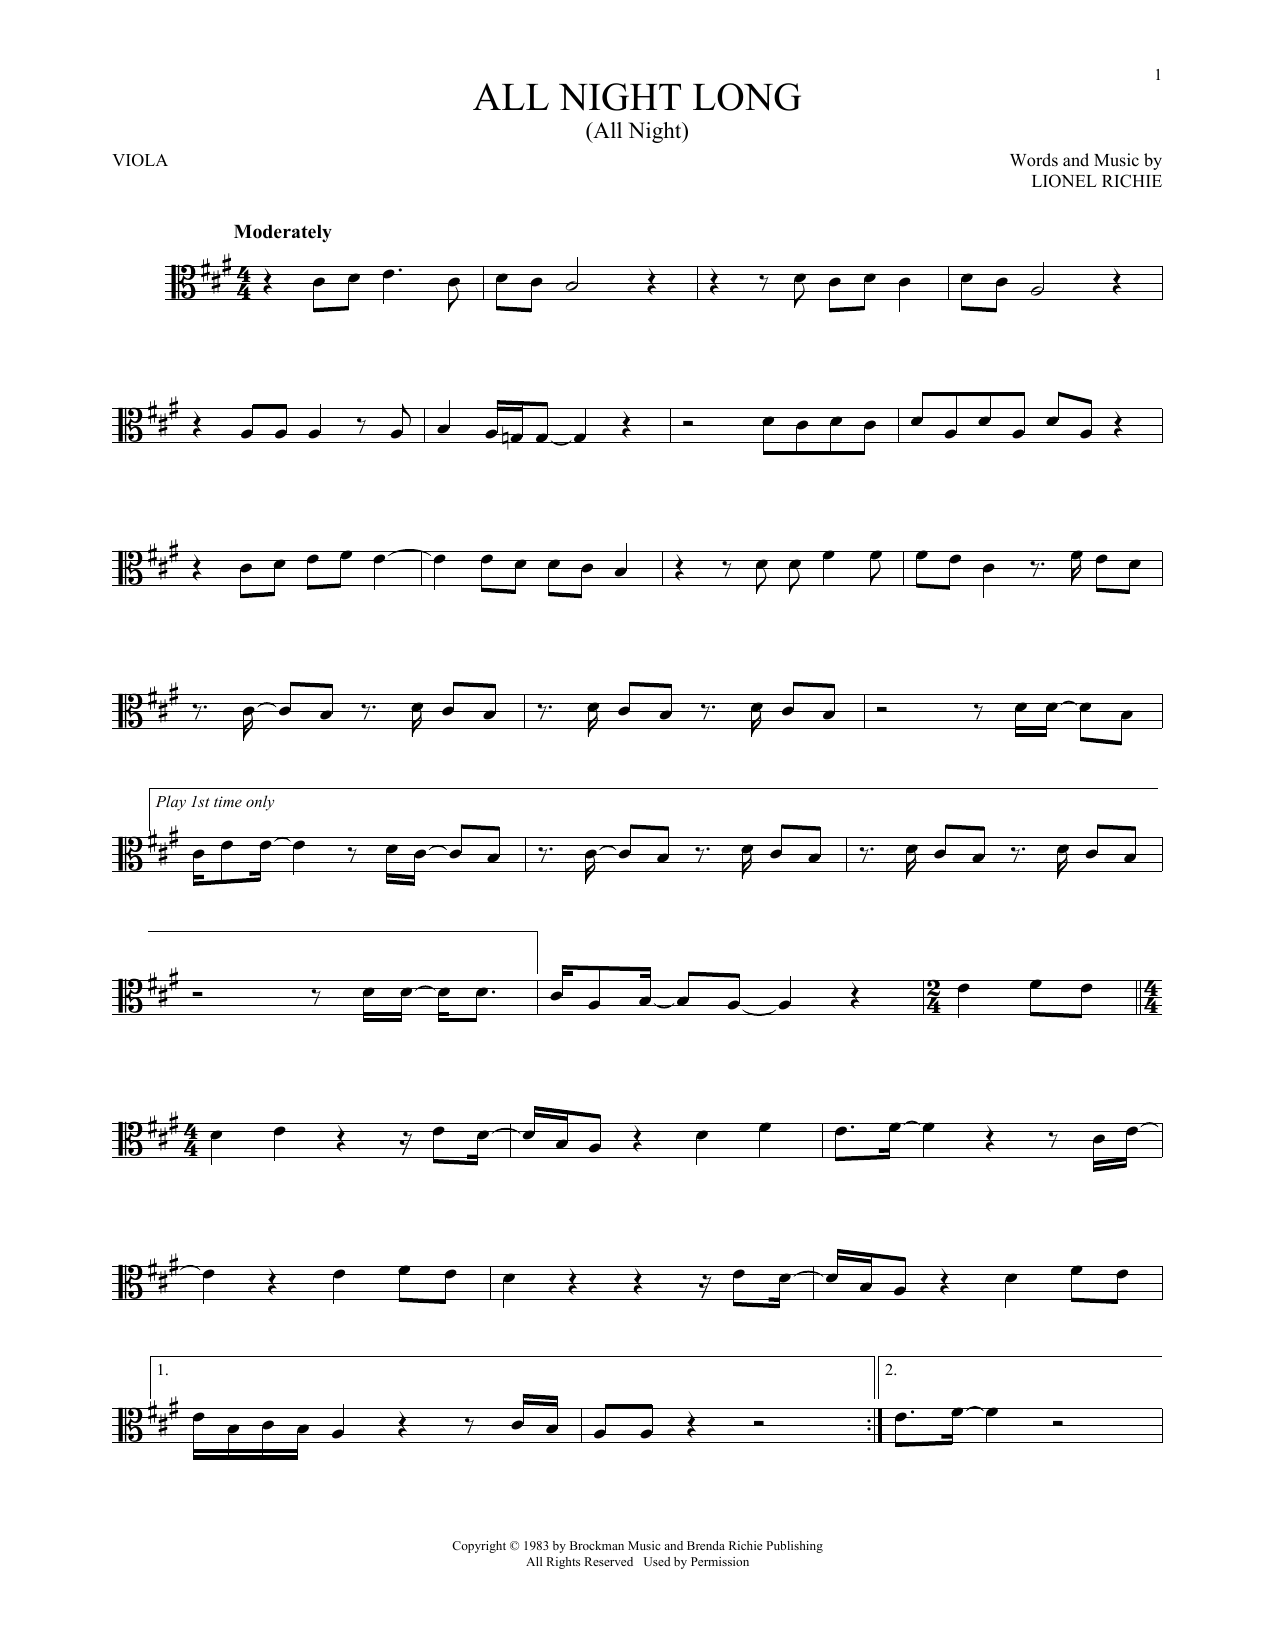 Download Lionel Richie All Night Long (All Night) Sheet Music